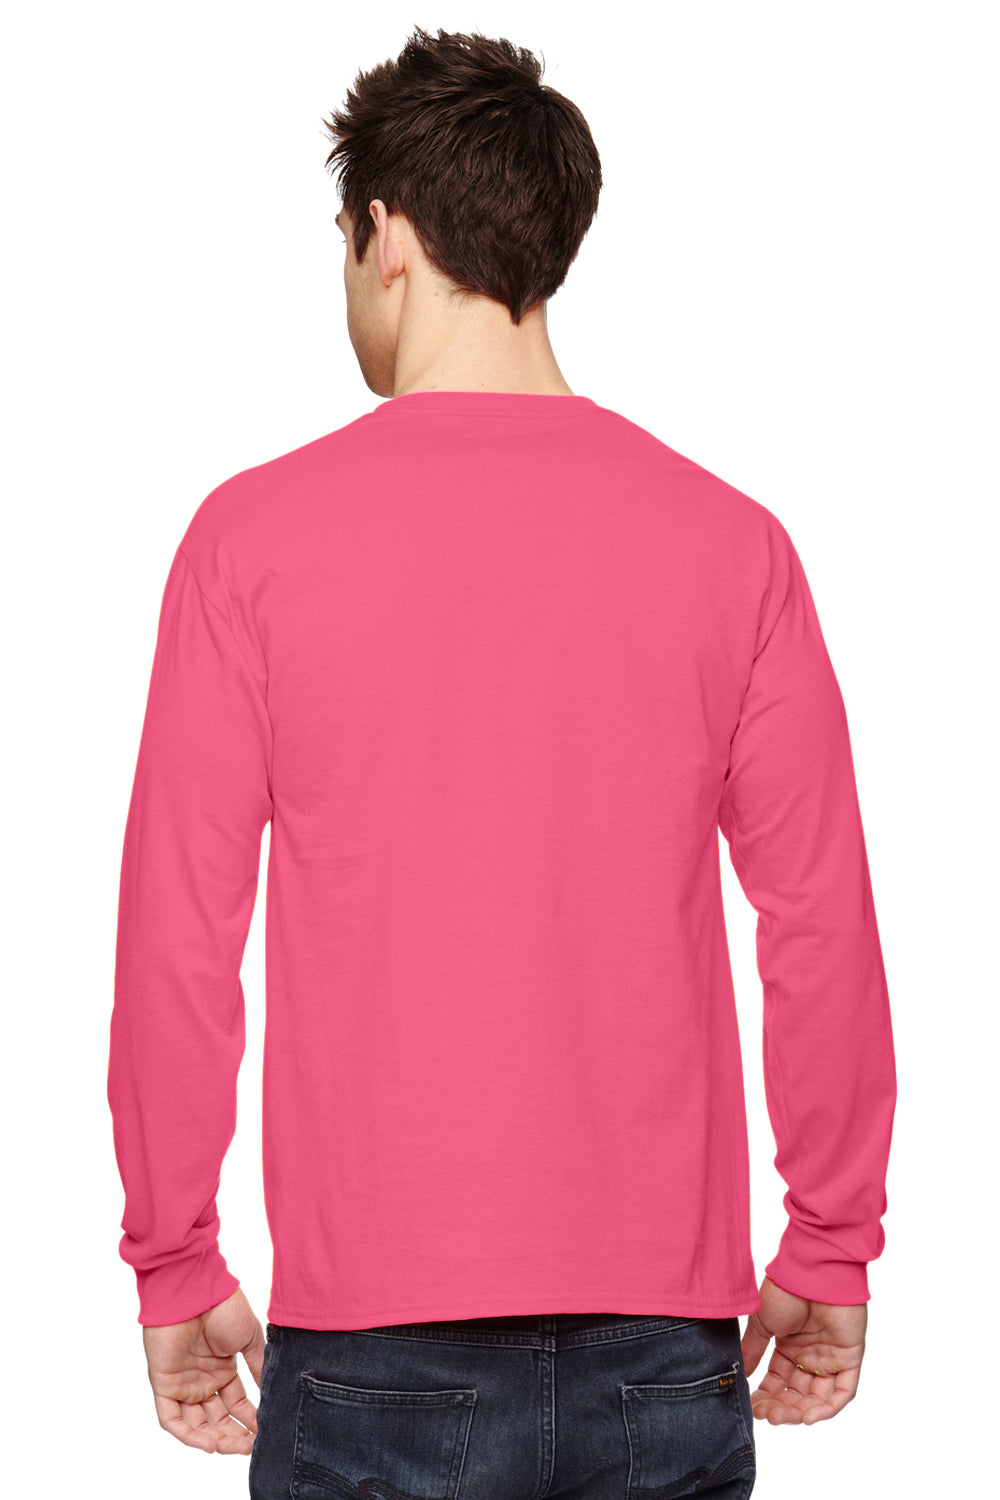 Fruit Of The Loom 4930 Mens HD Jersey Long Sleeve Crewneck T-Shirt Neon Pink Back